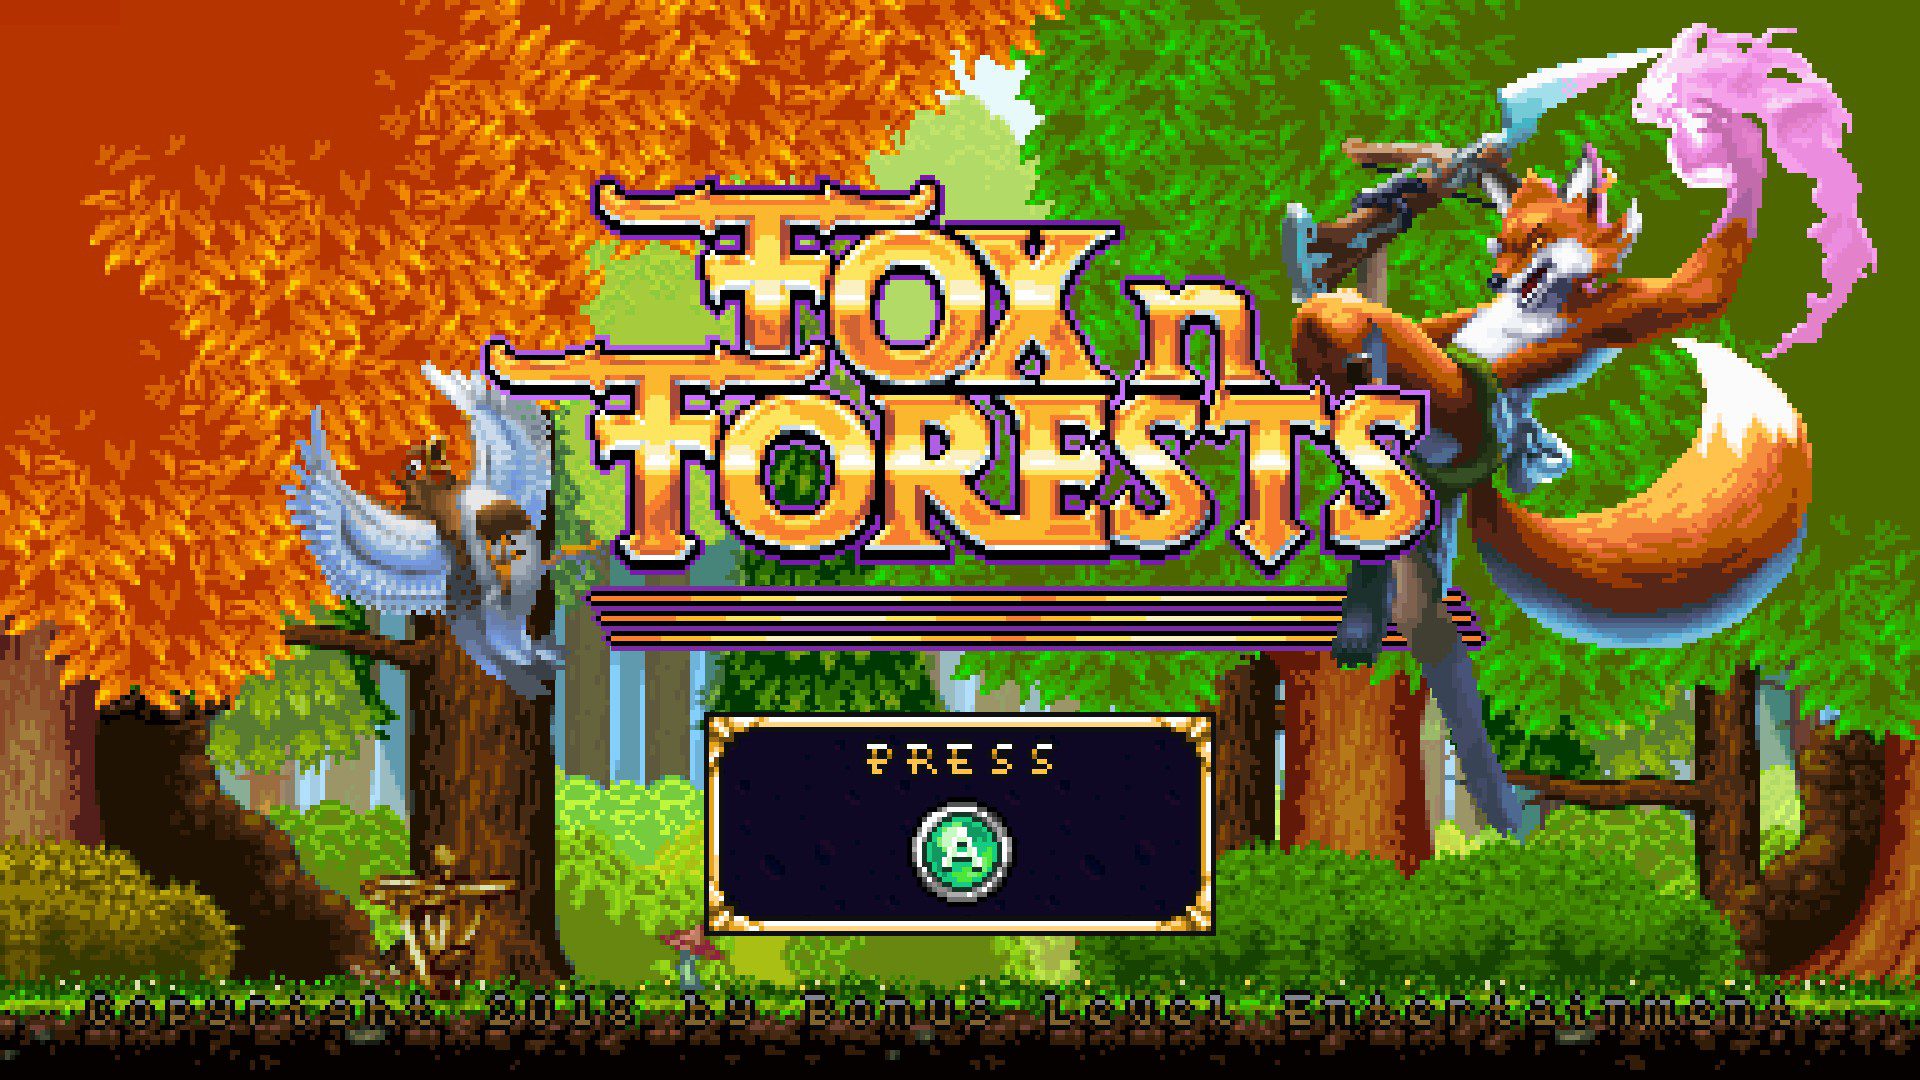 FOX n FORESTS Review